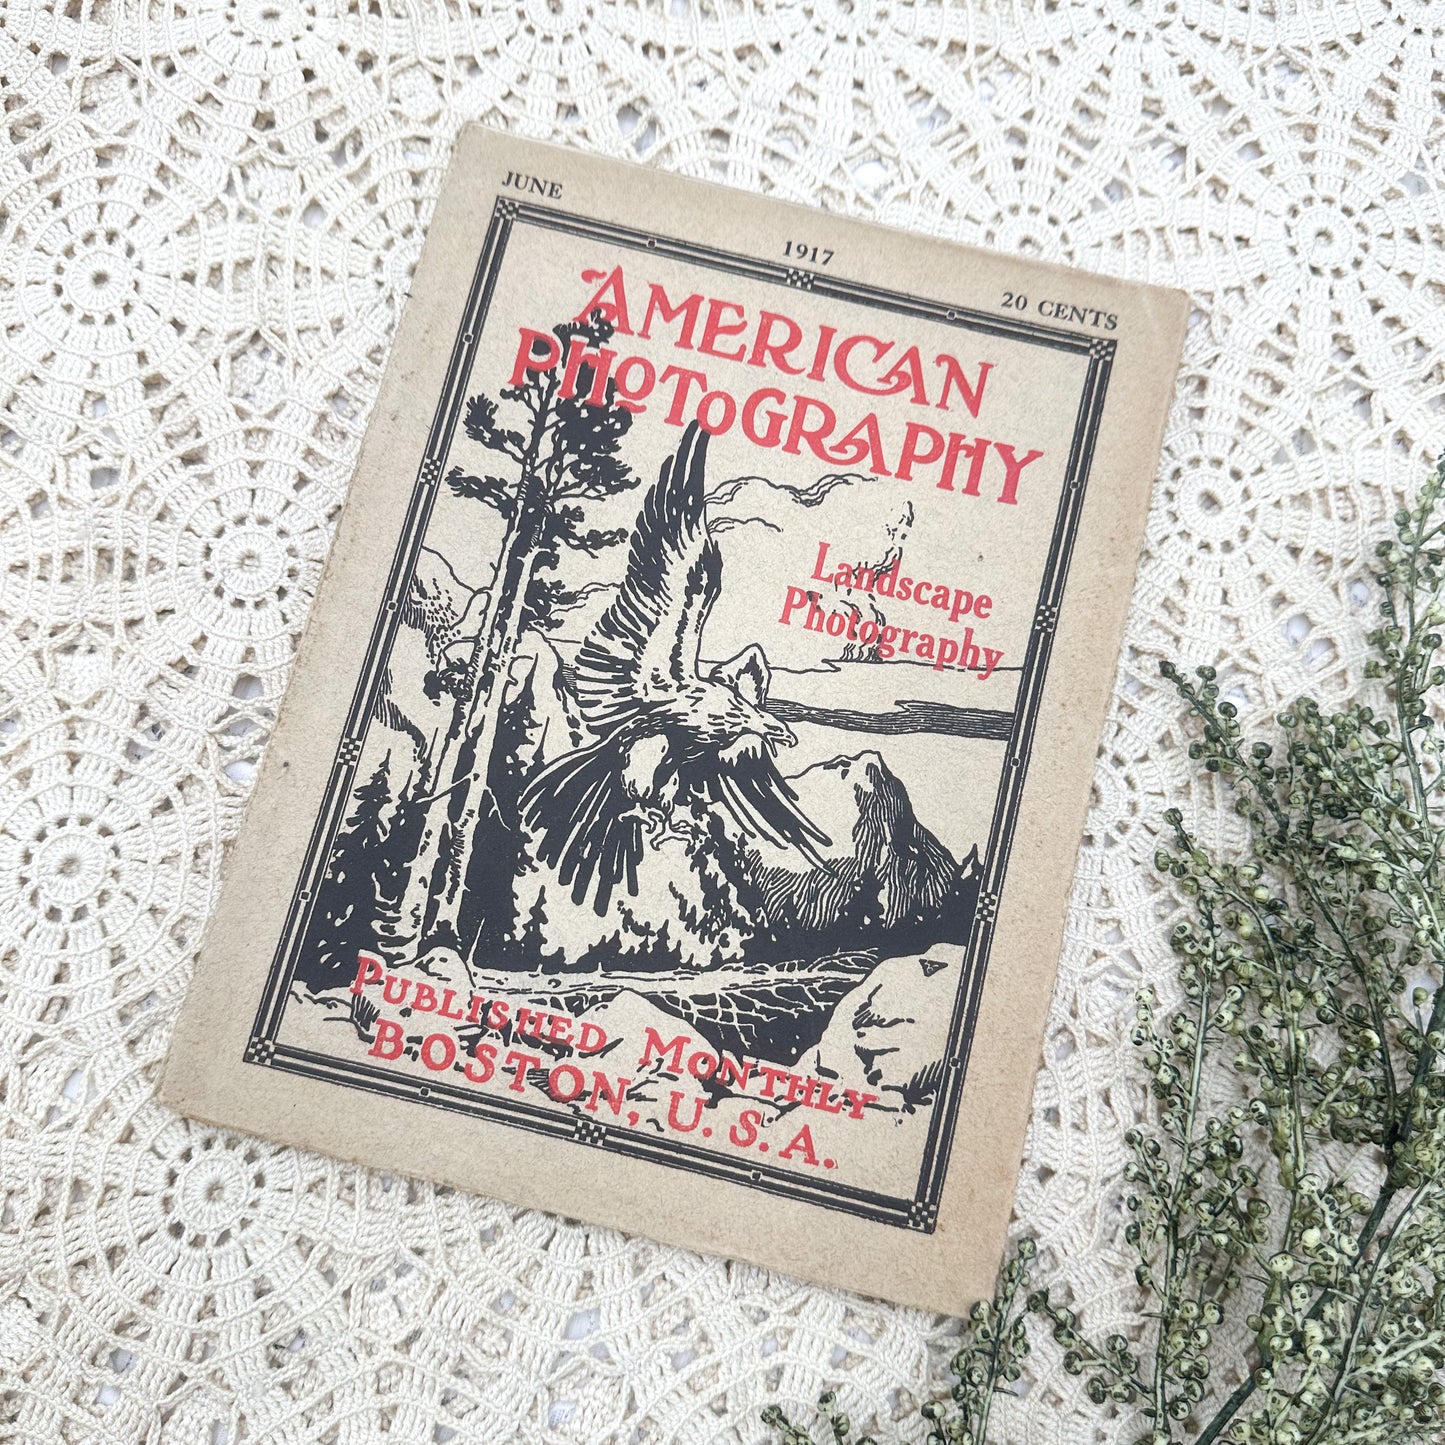 American Photography, 1917 Landscape Photography